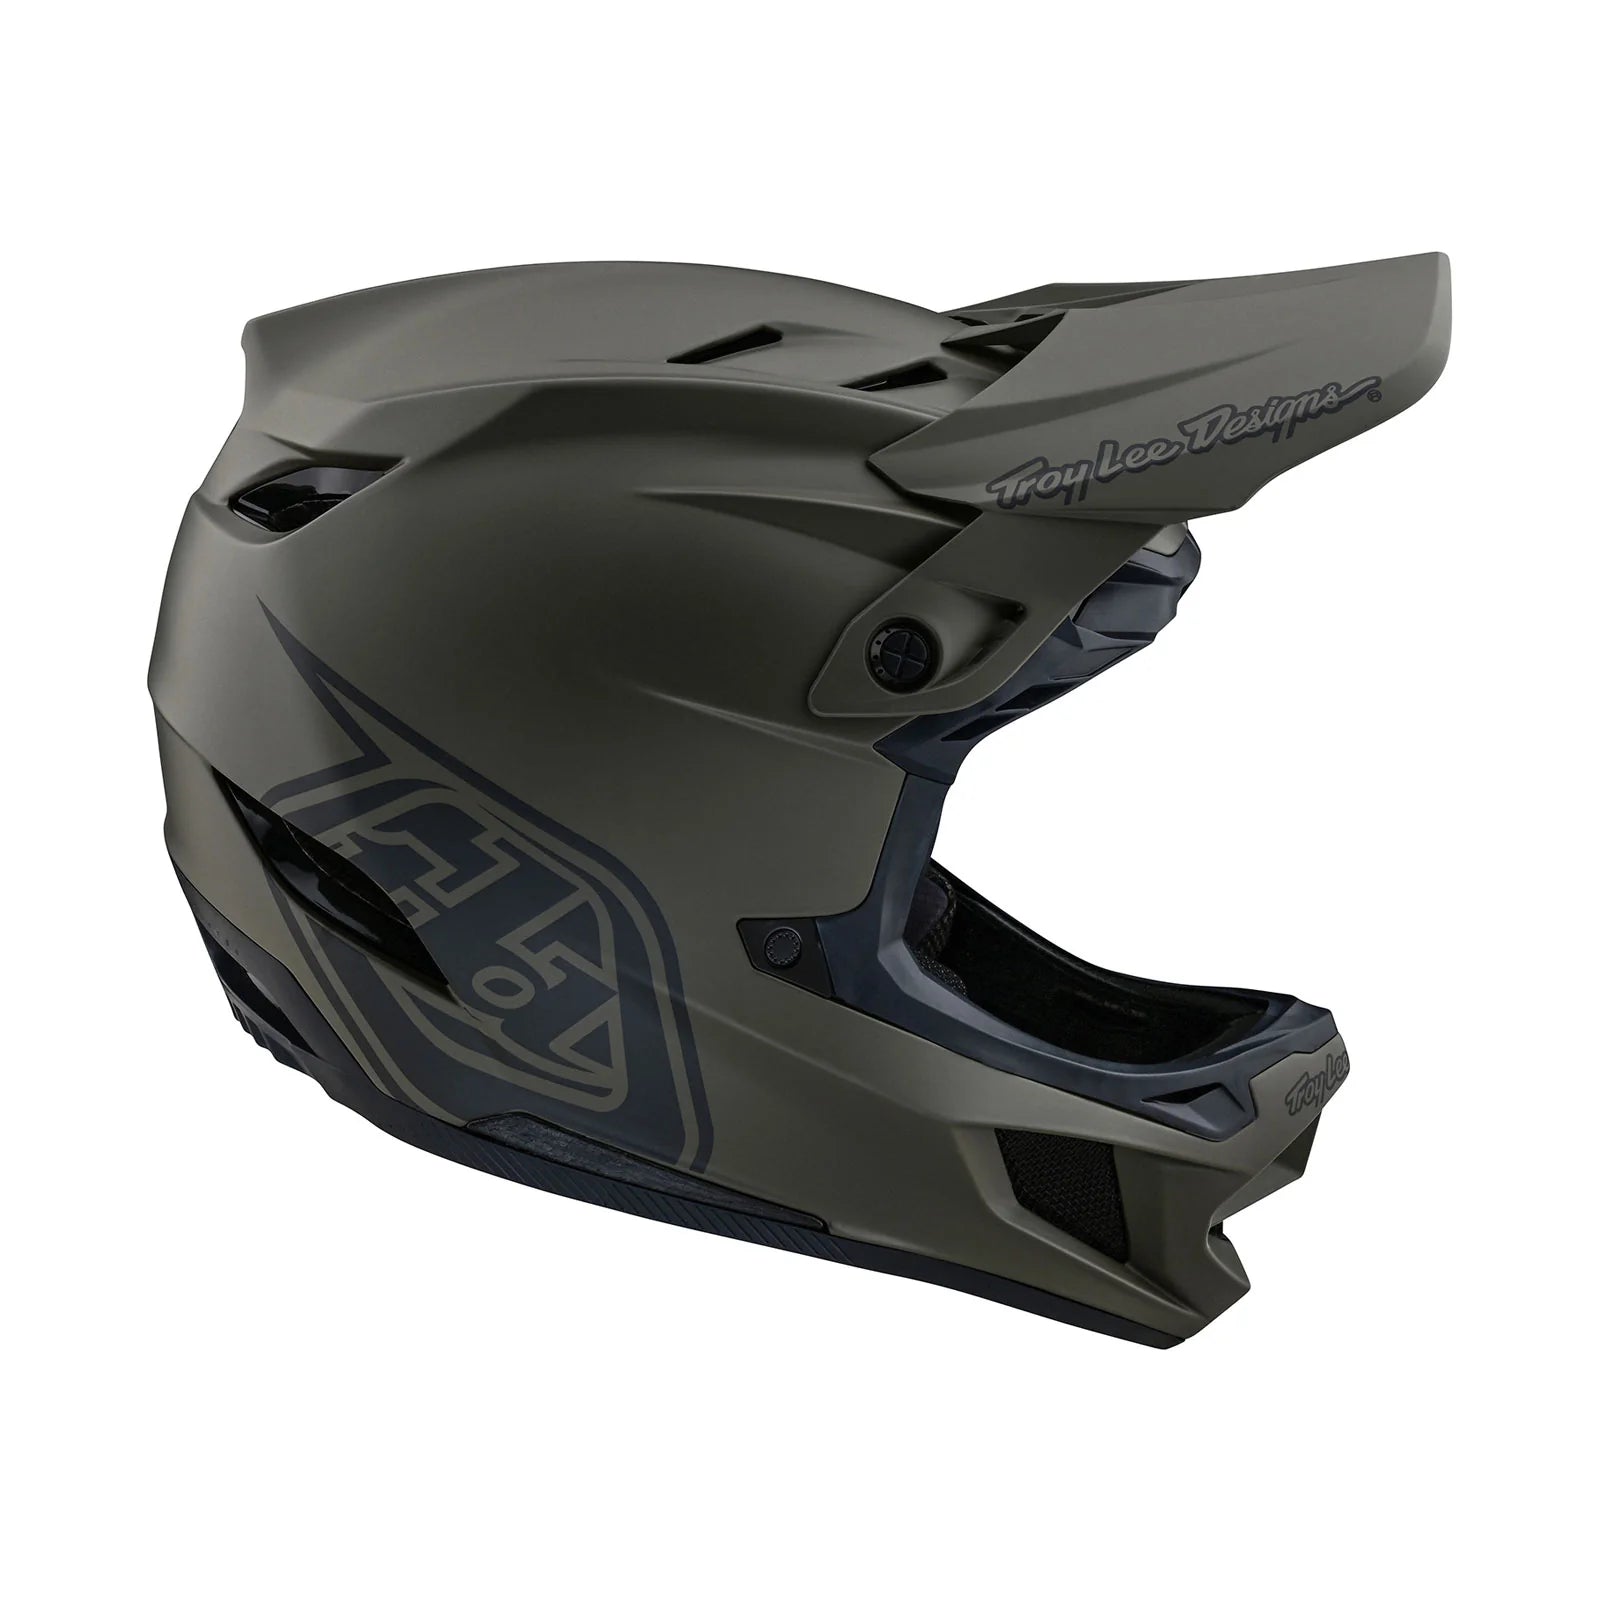 The TLD D4 AS Composite Helmet W/MIPS Stealth Tarmac, featuring the Mips protection system, is shown on a white background.